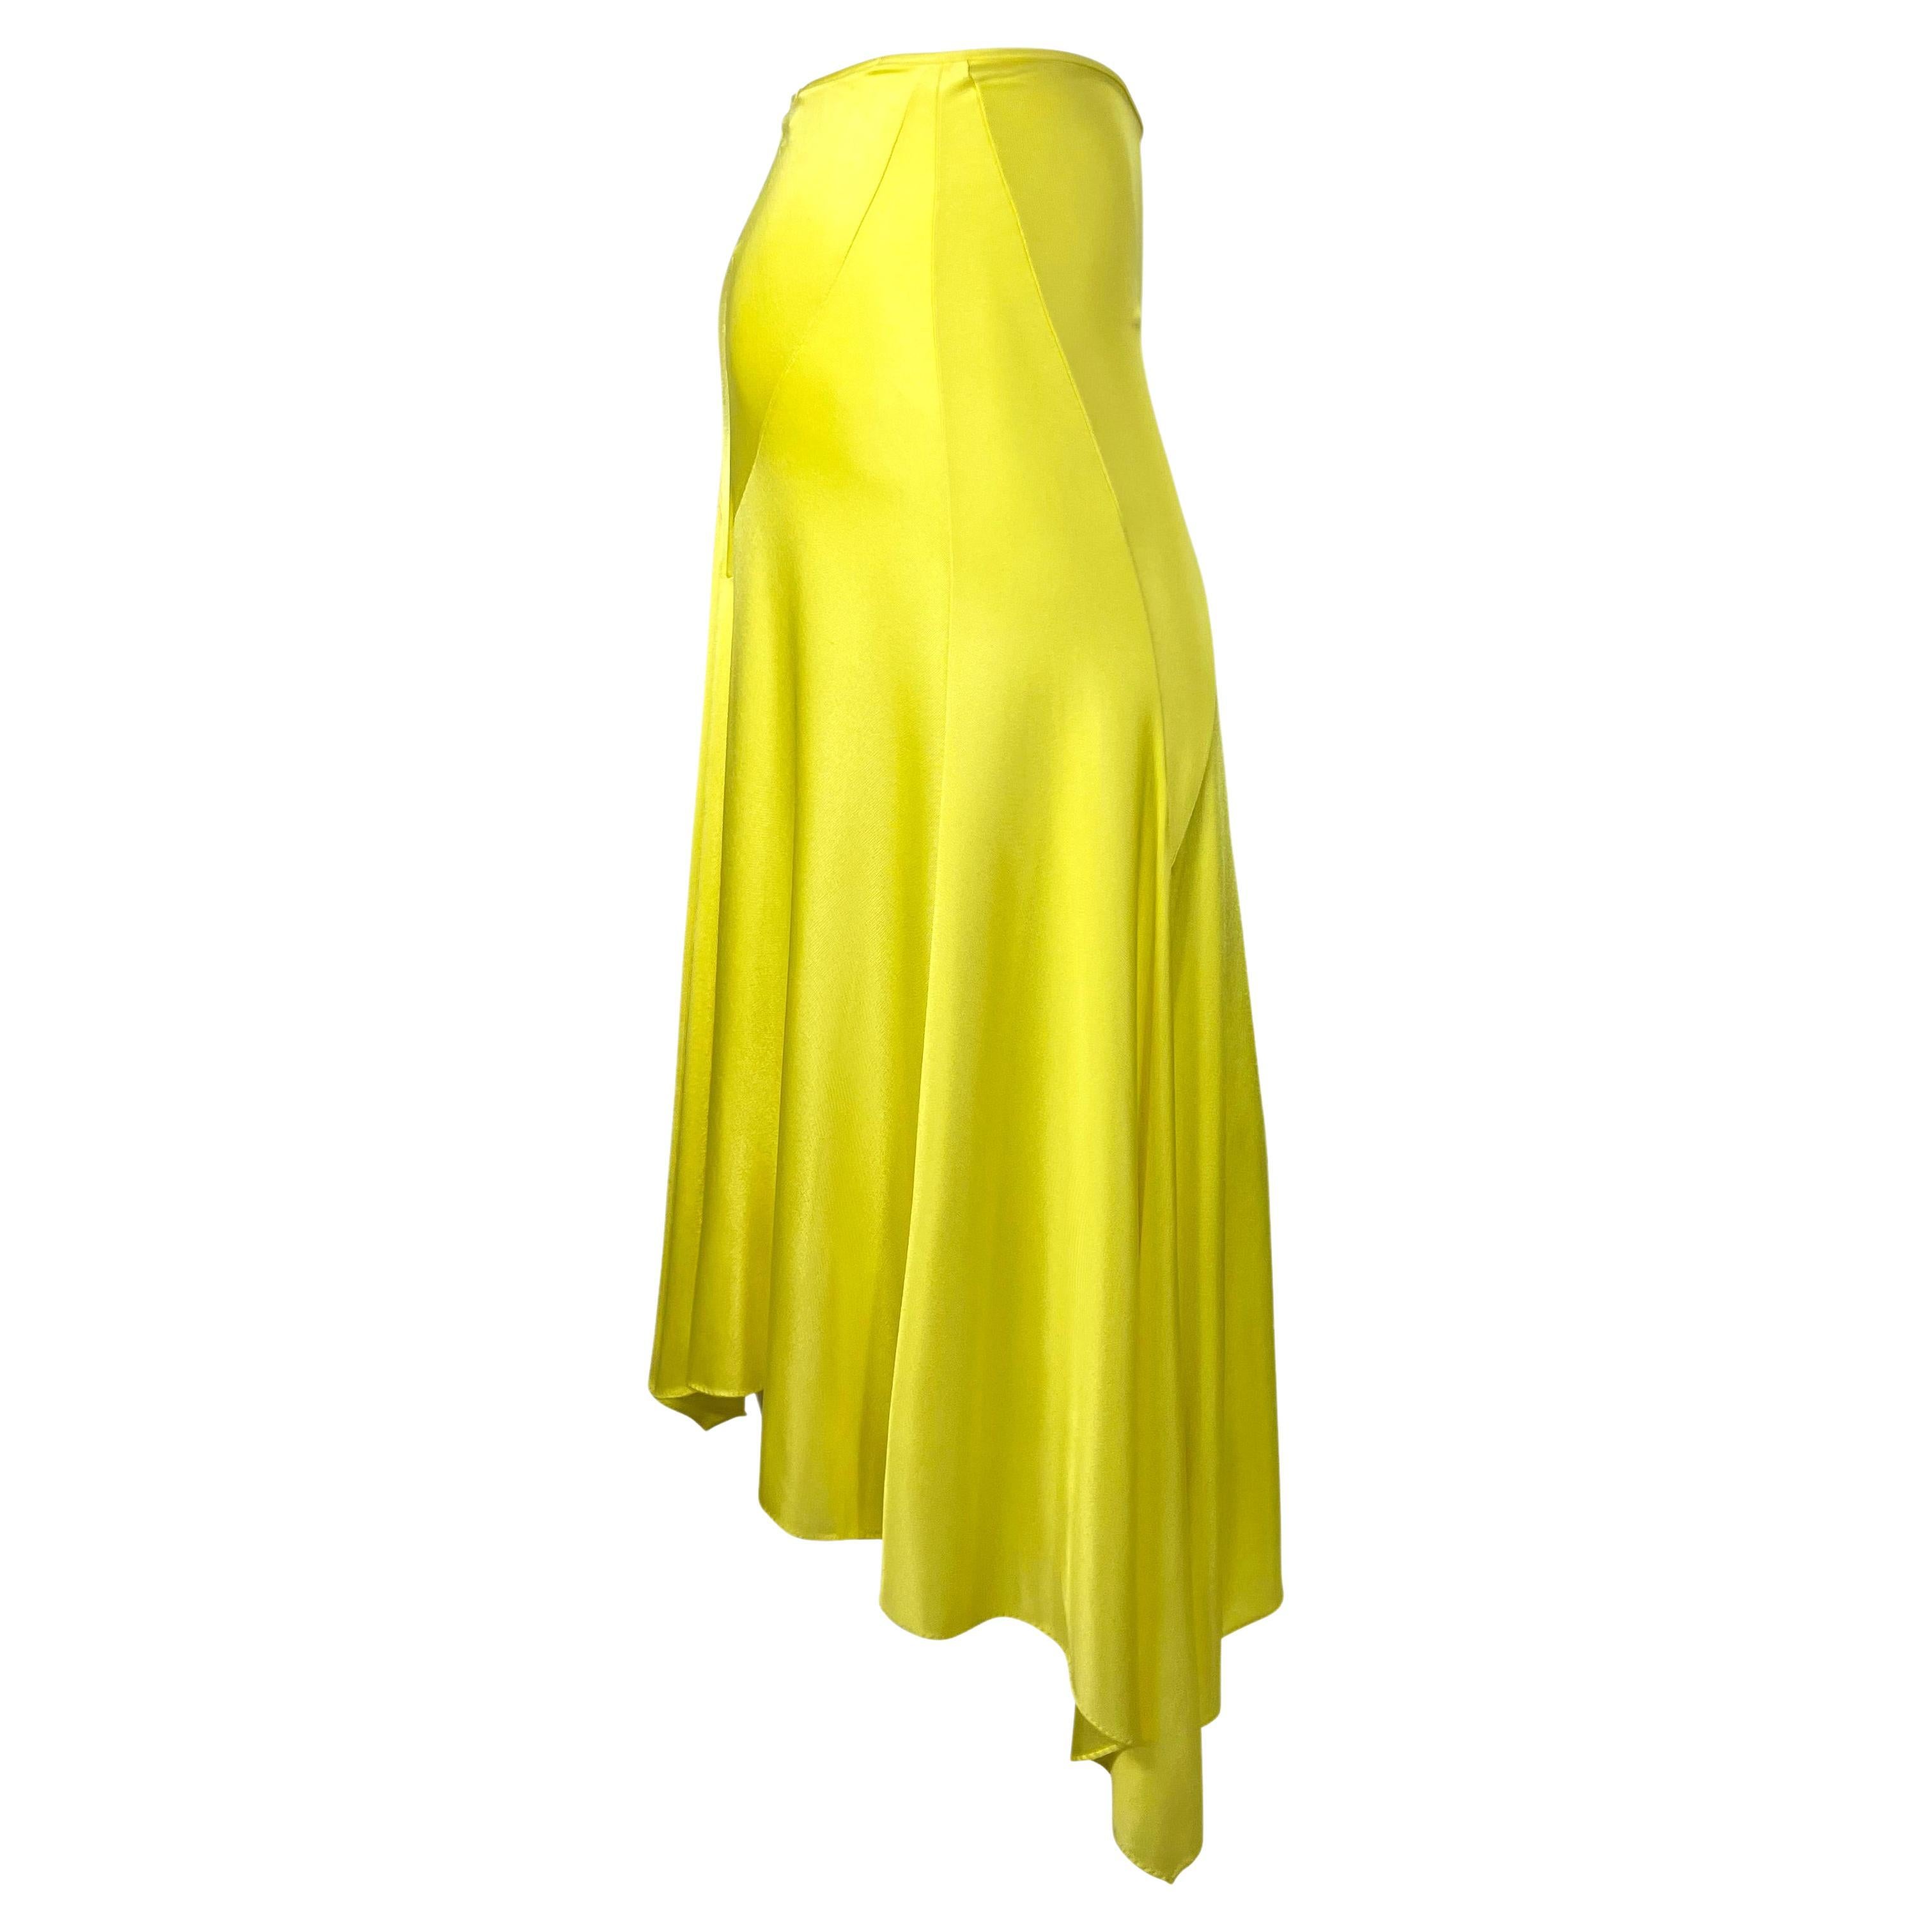 Women's S/S 2004 Yves Saint Laurent by Tom Ford Canary Yellow Stretch Maxi Skirt For Sale